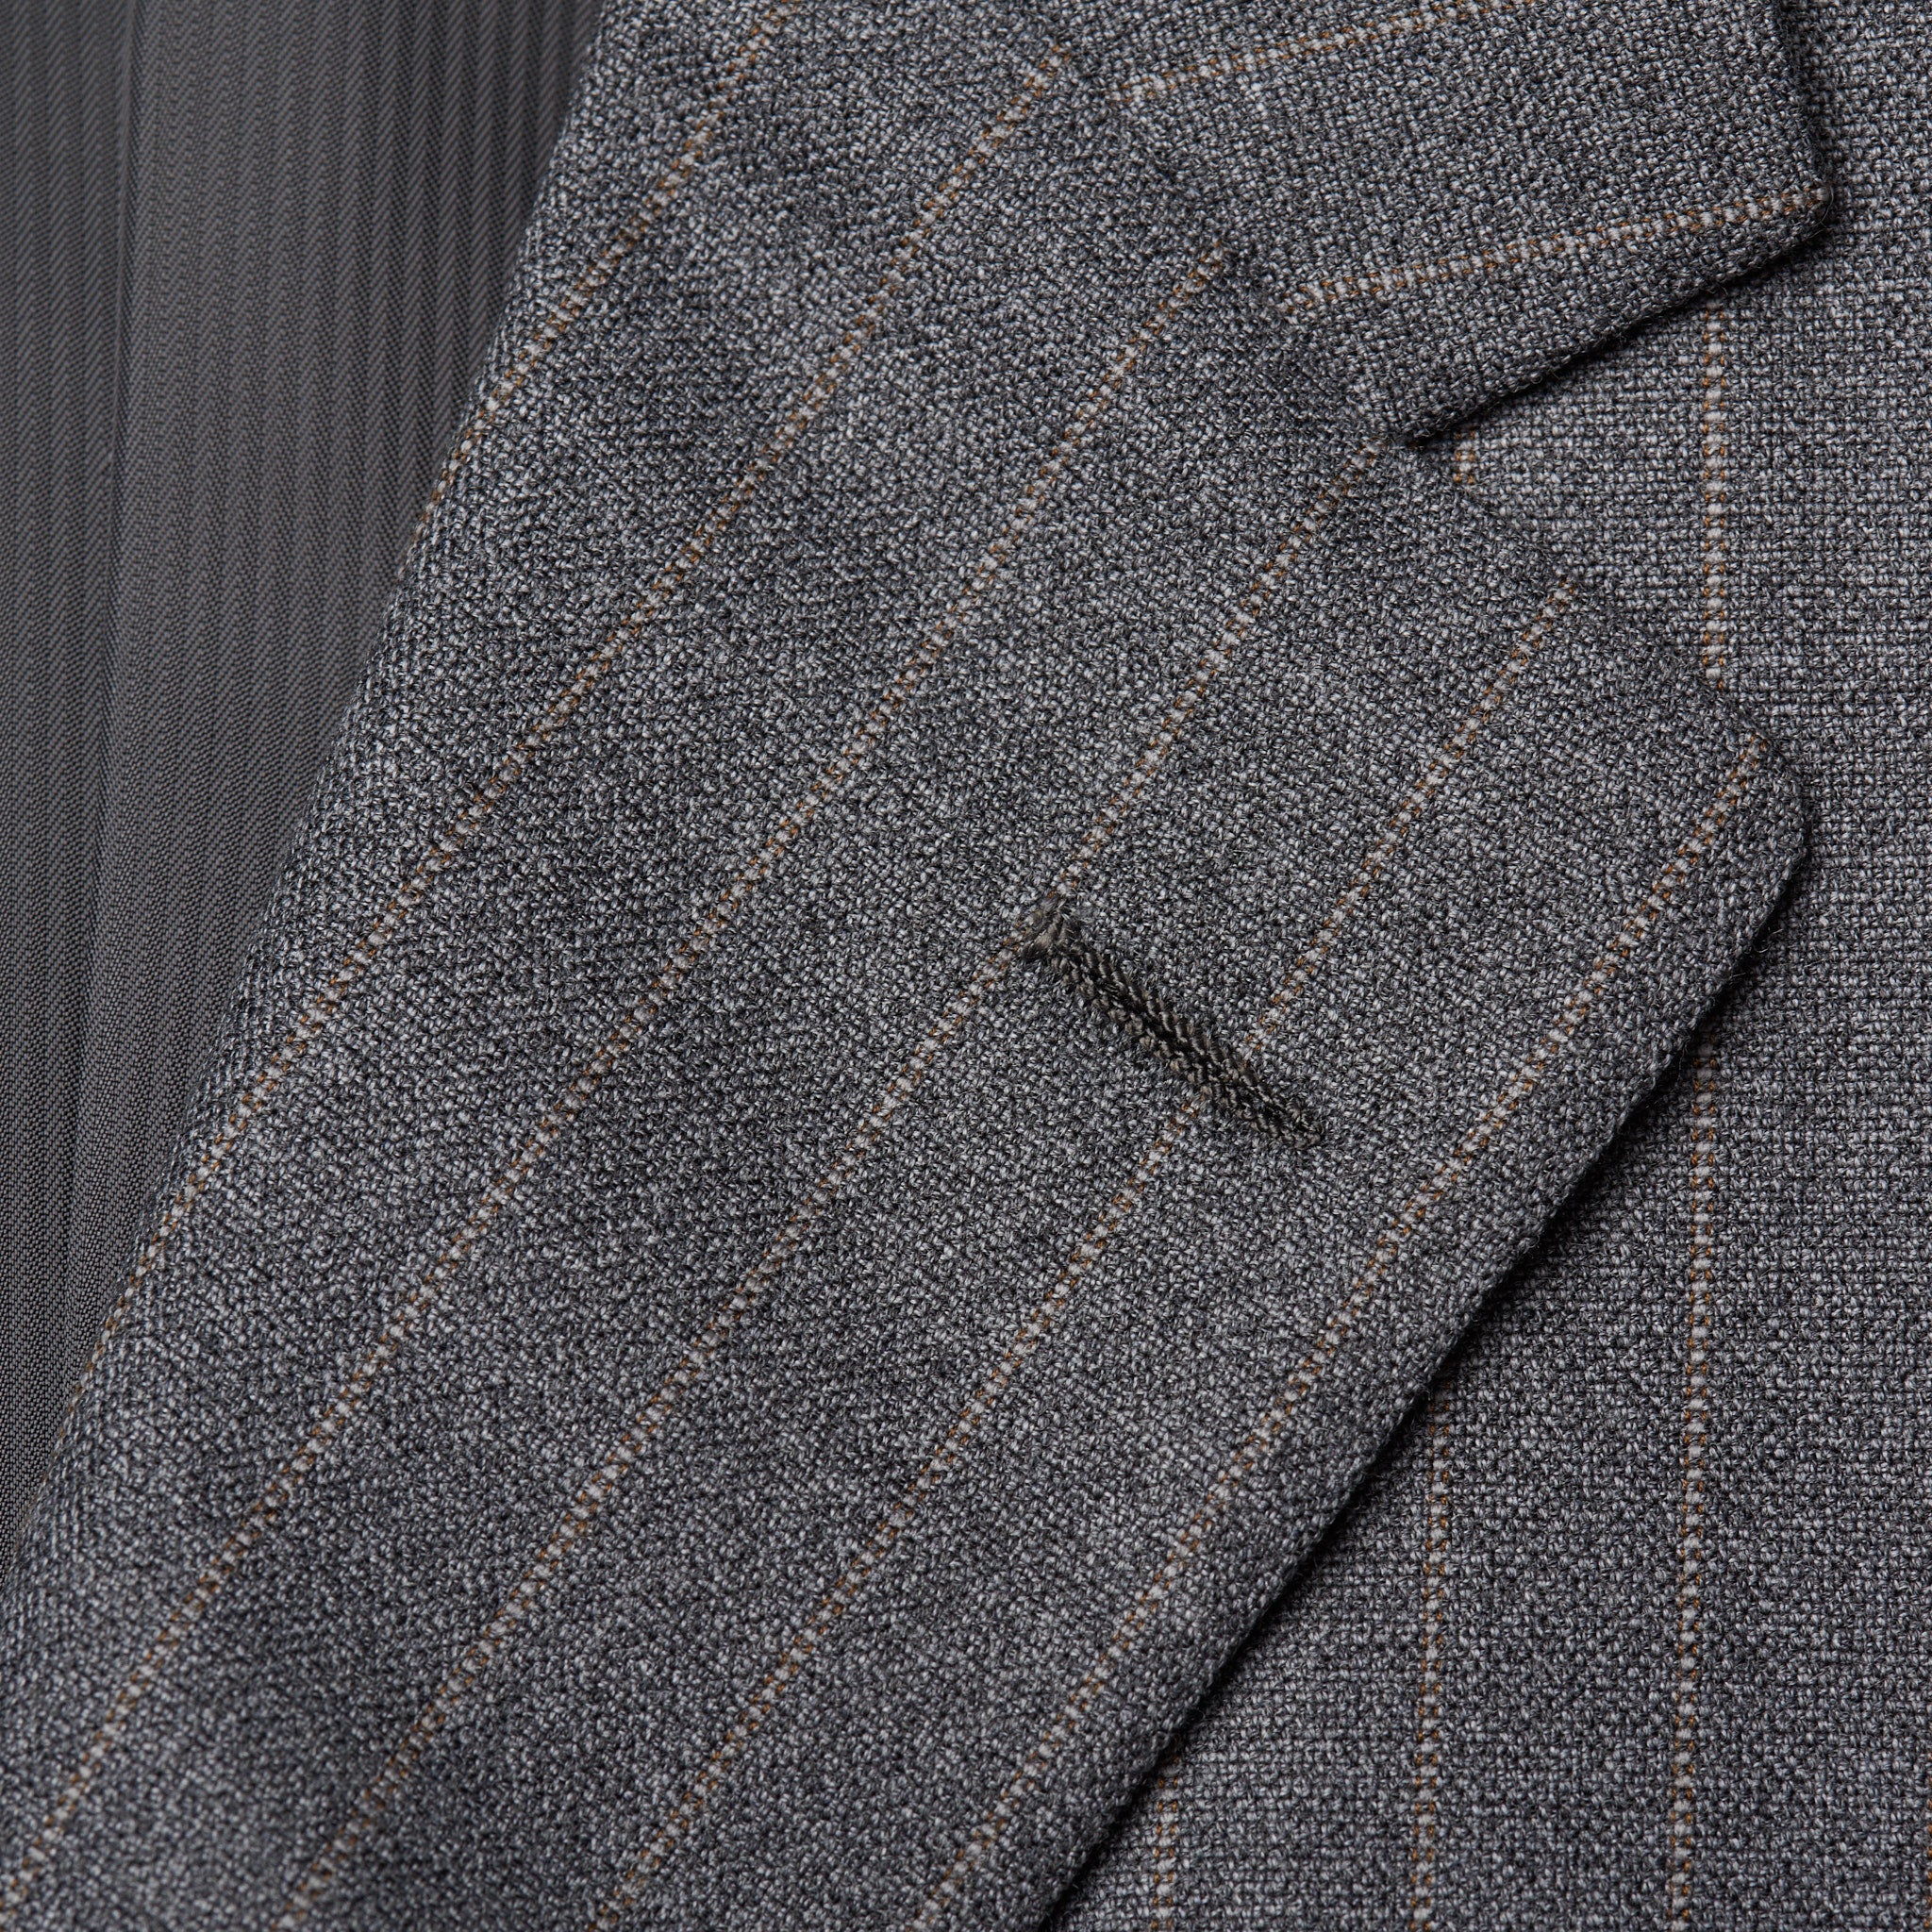 D'AVENZA Roma Handmade Gray Striped Wool Business Suit EU 52 NEW US 42 D'AVENZA